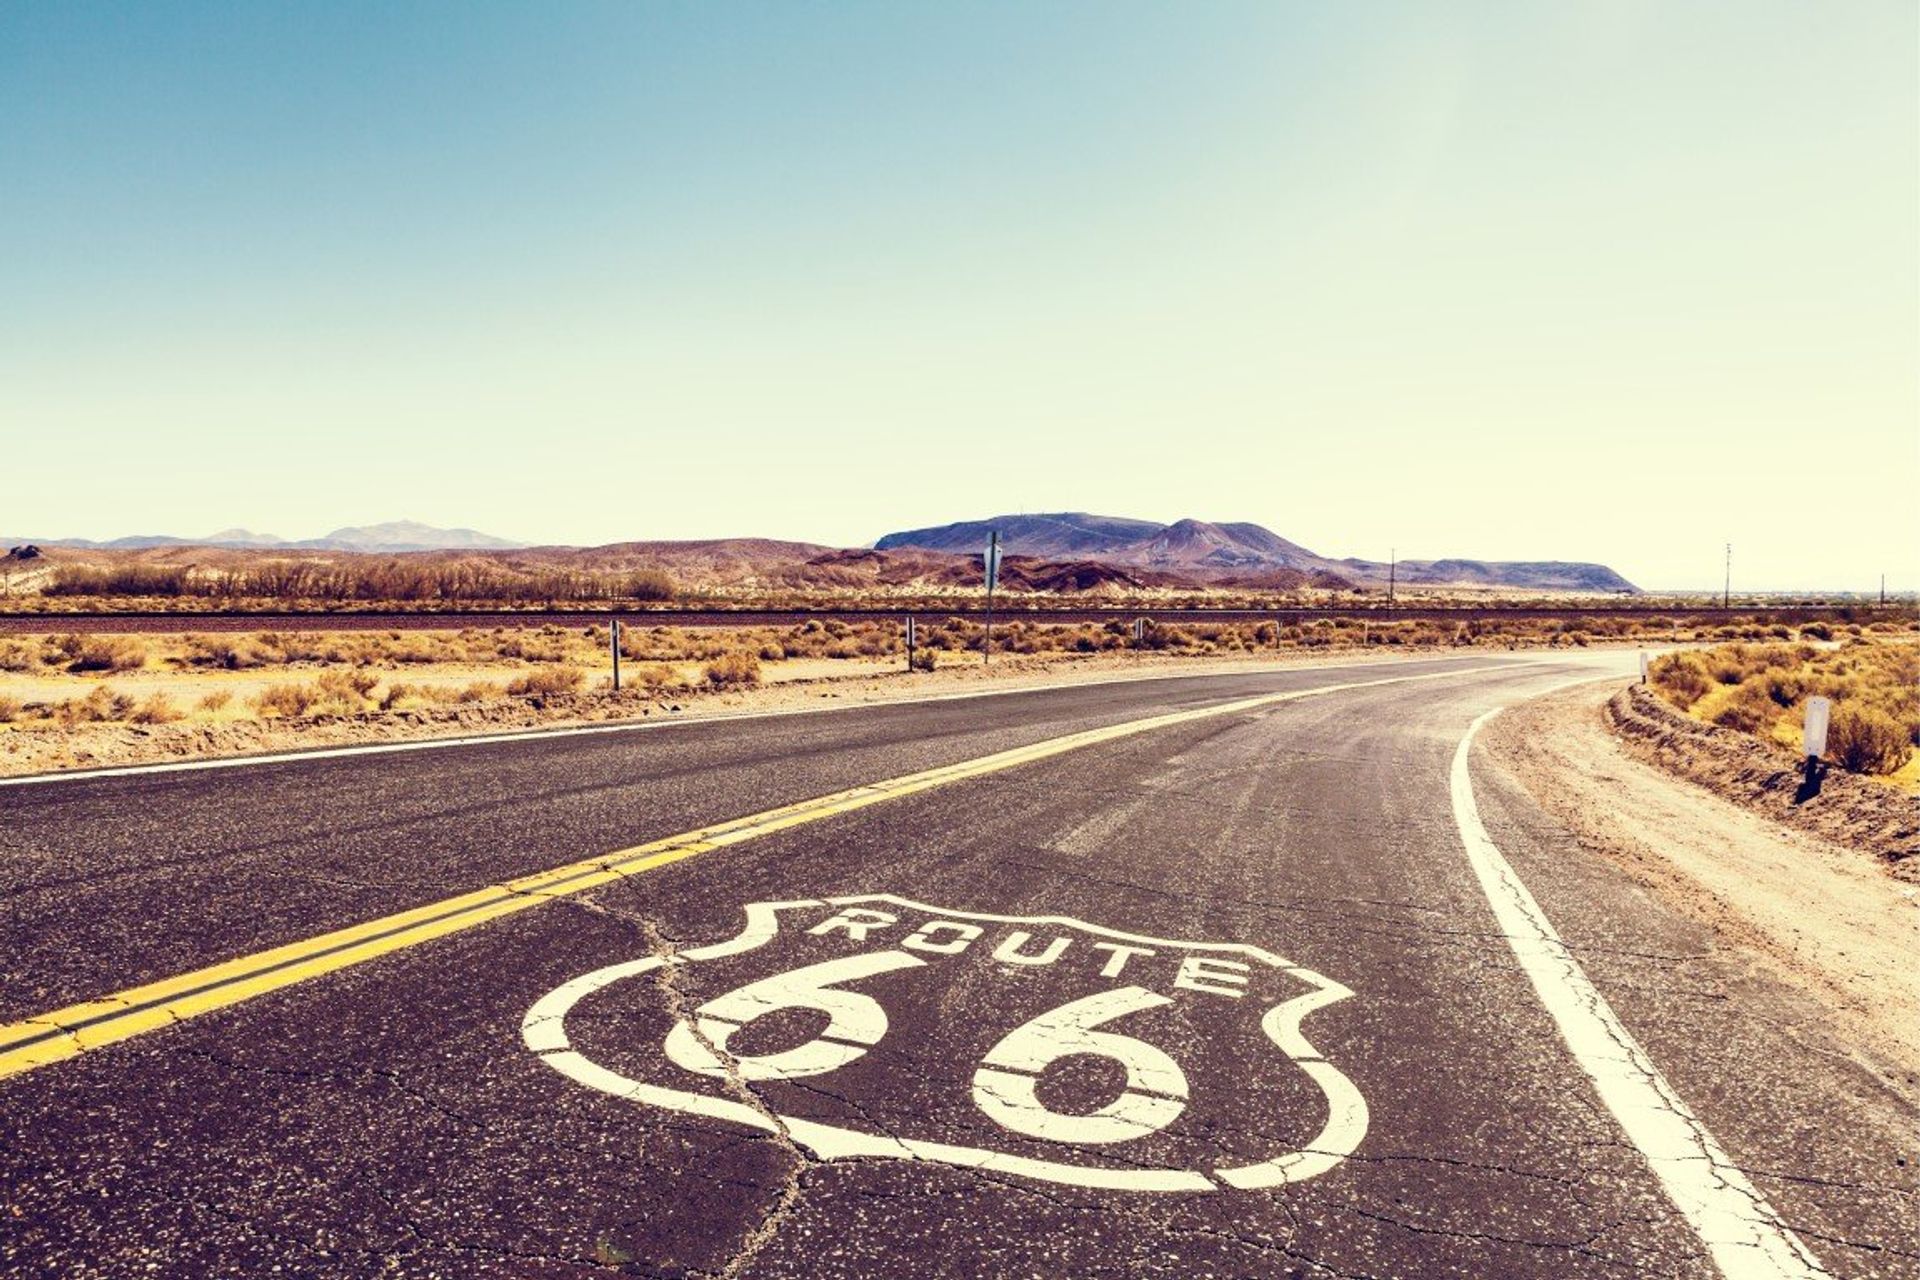 Take the famous Route 66 for a road trip of a lifetime...